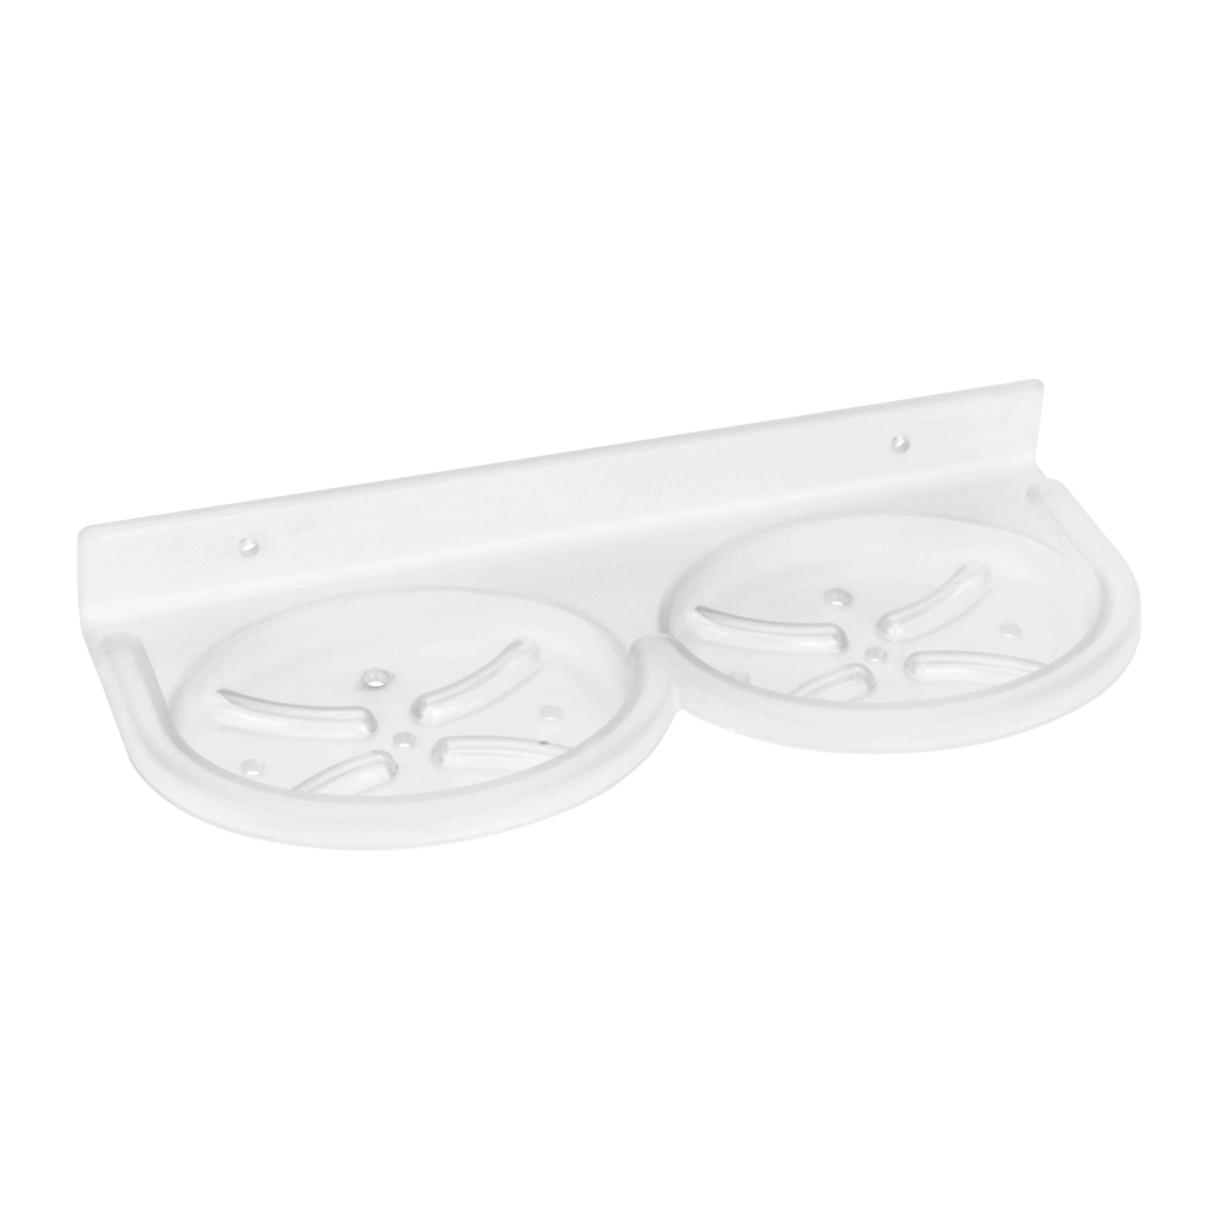 Round ABS Double Soap Dish